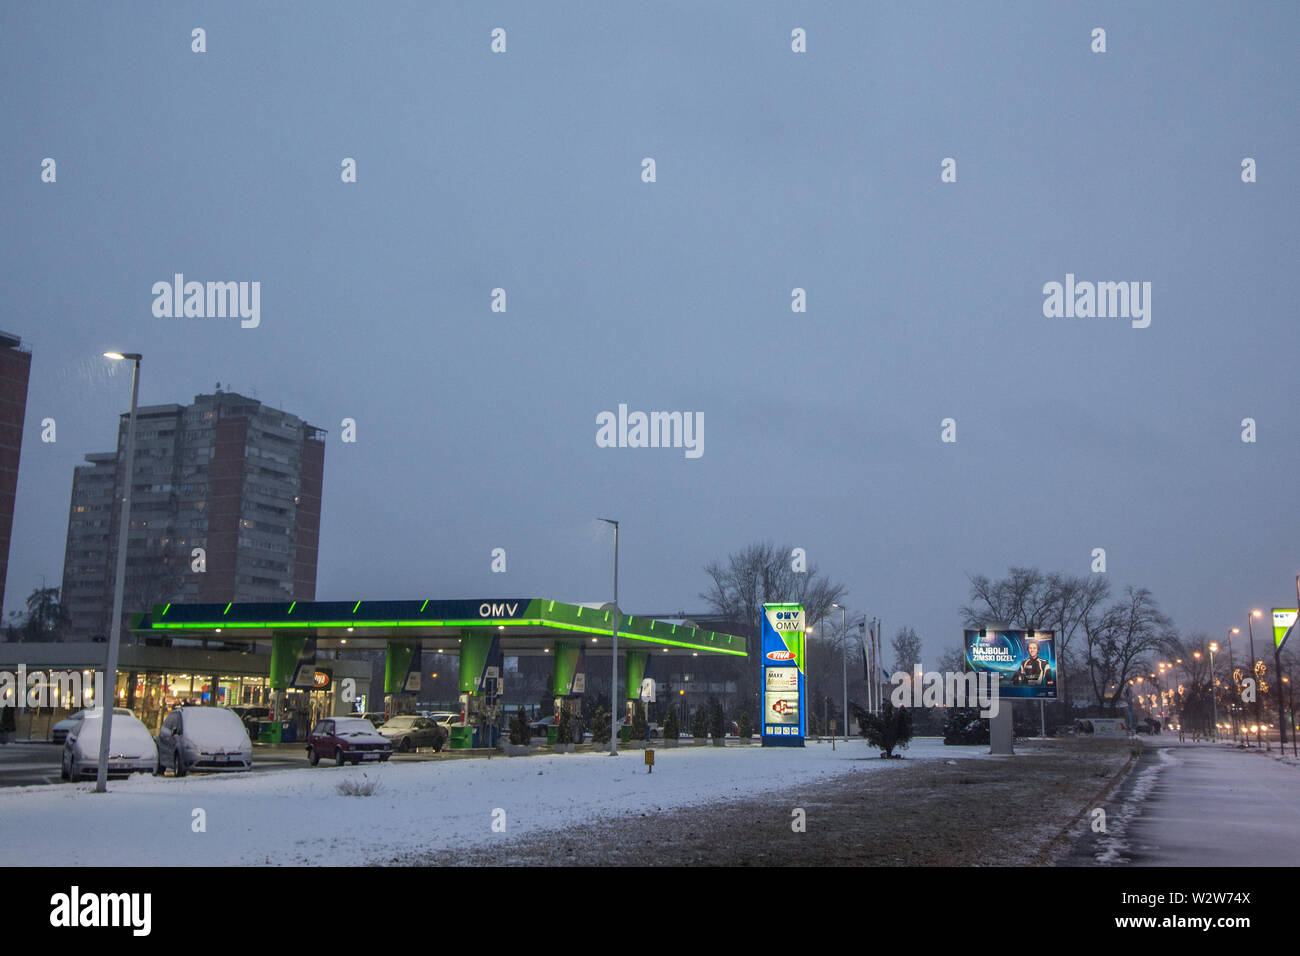 BELGRADE, SERBIA - JANUARY 6, 2019: Logo of OMV on one of its gas stations of Belgrade. OMV is an Austrian petroleum and gas company spread all accros Stock Photo